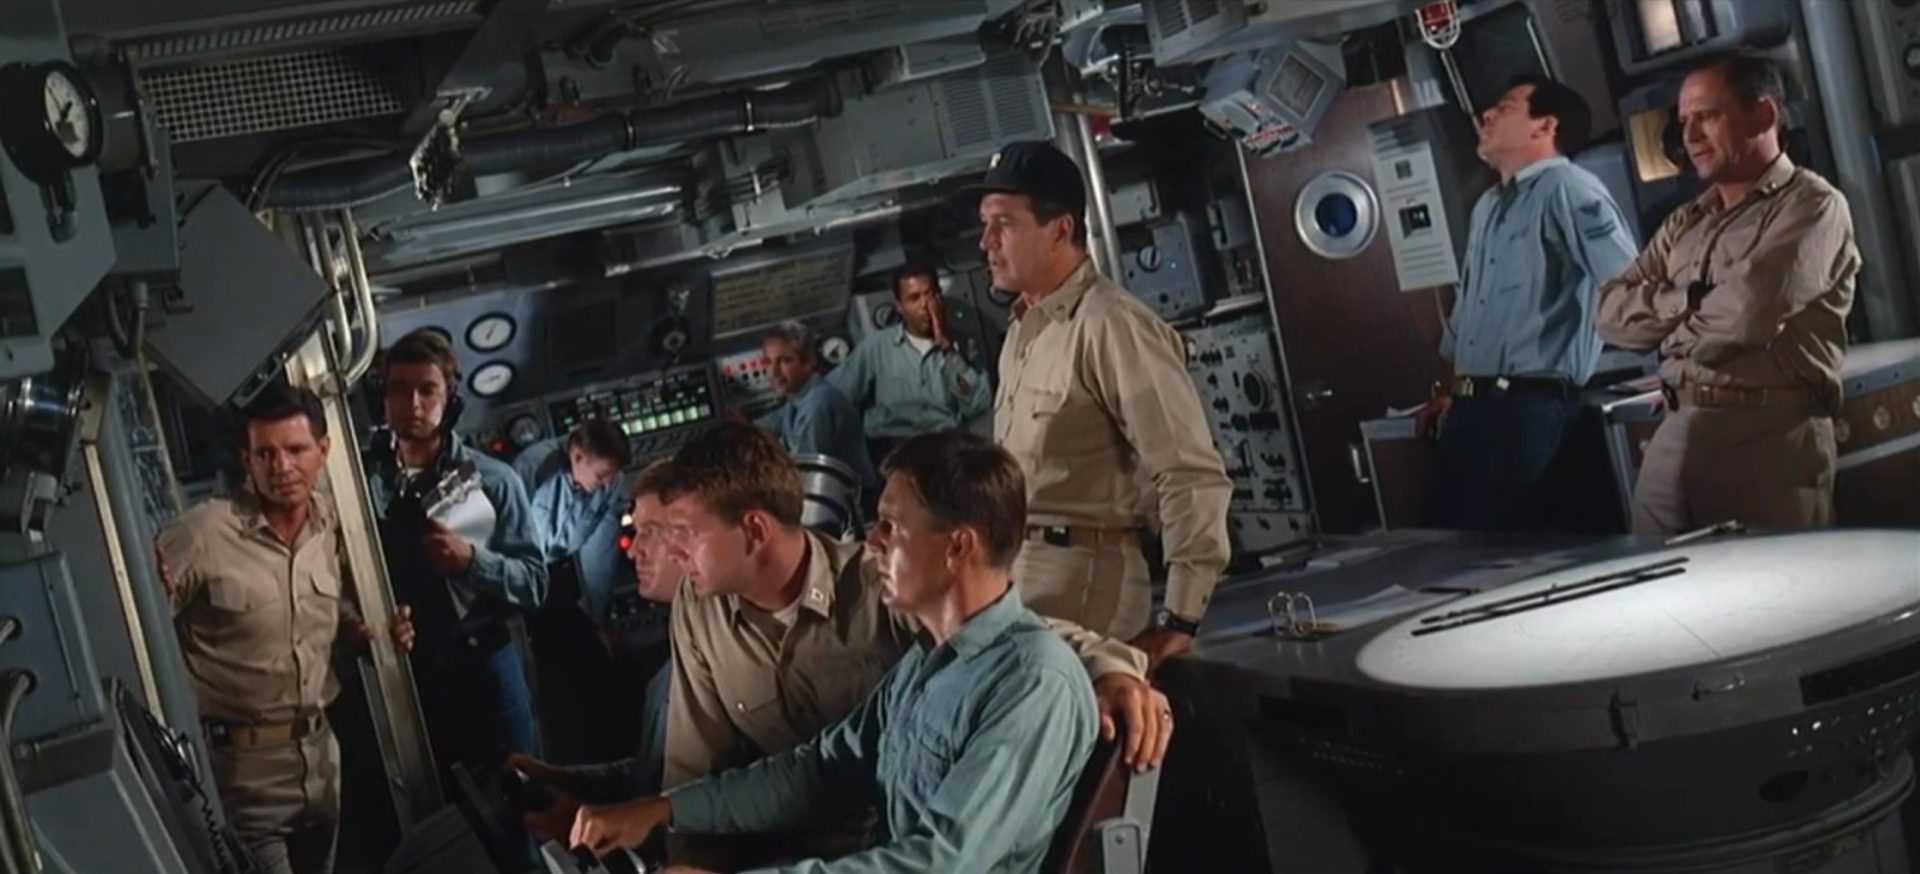 View of the command center of the US nuclear submarine, which is inclined to the left, with several crew members and Rock Hudson as commander in the center.